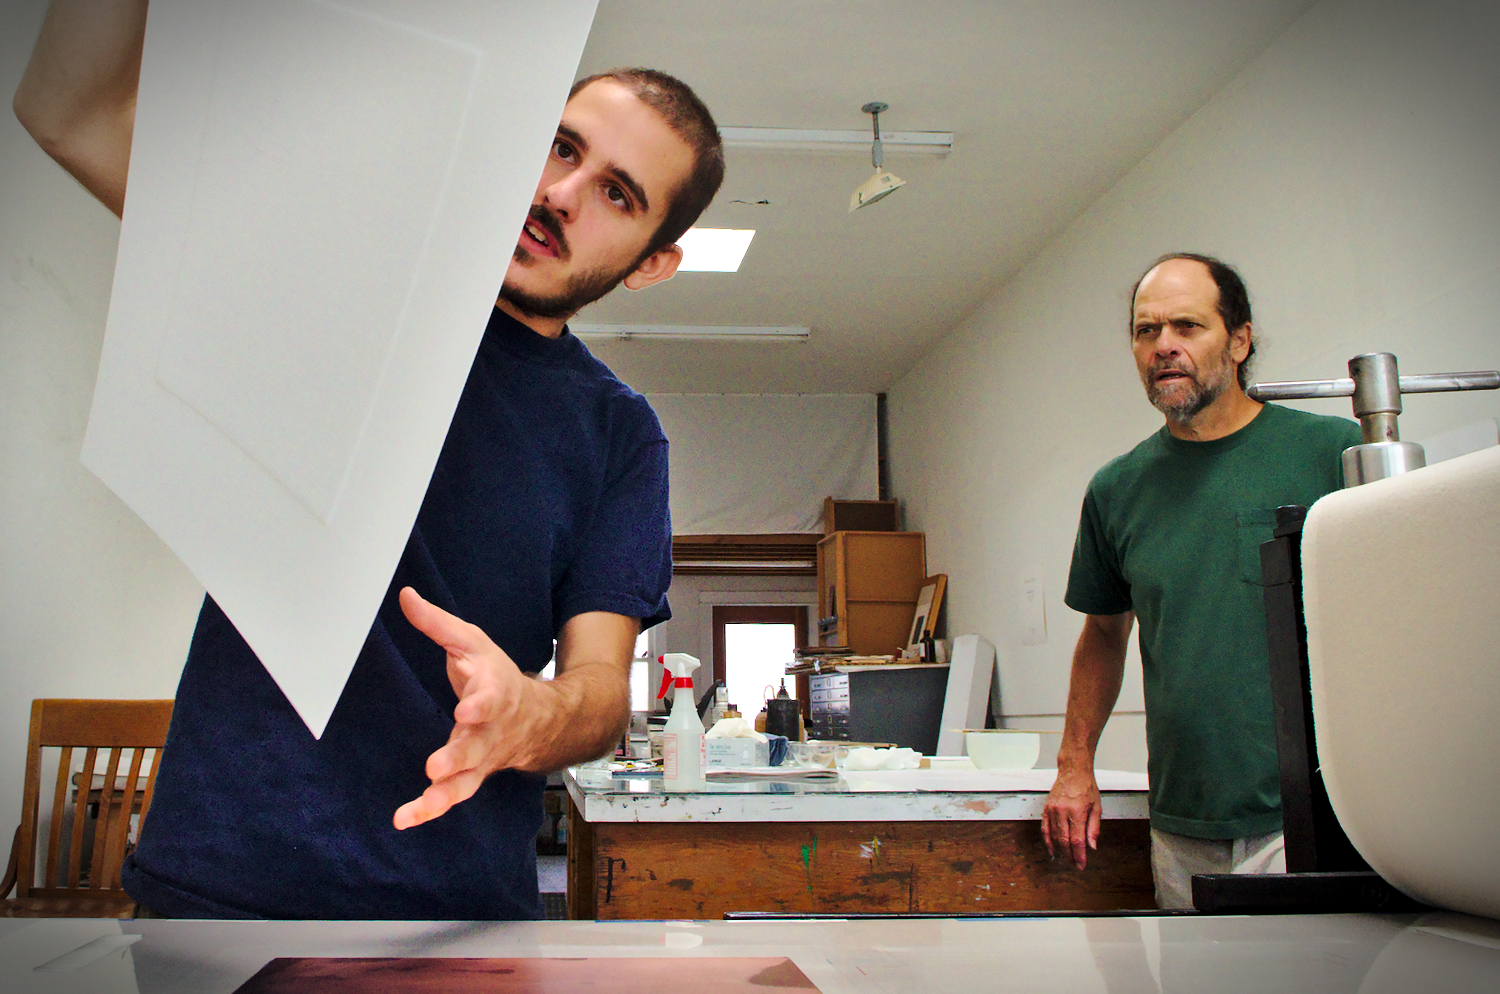  The renowned printmaster Jacob Samuel (right) continues to regularly edit professionnal artists. Assisted by Sam Gessow (left), a young printmaster, Jacob controls an Intaglio editions from the NYC artist Tom Sachs. 